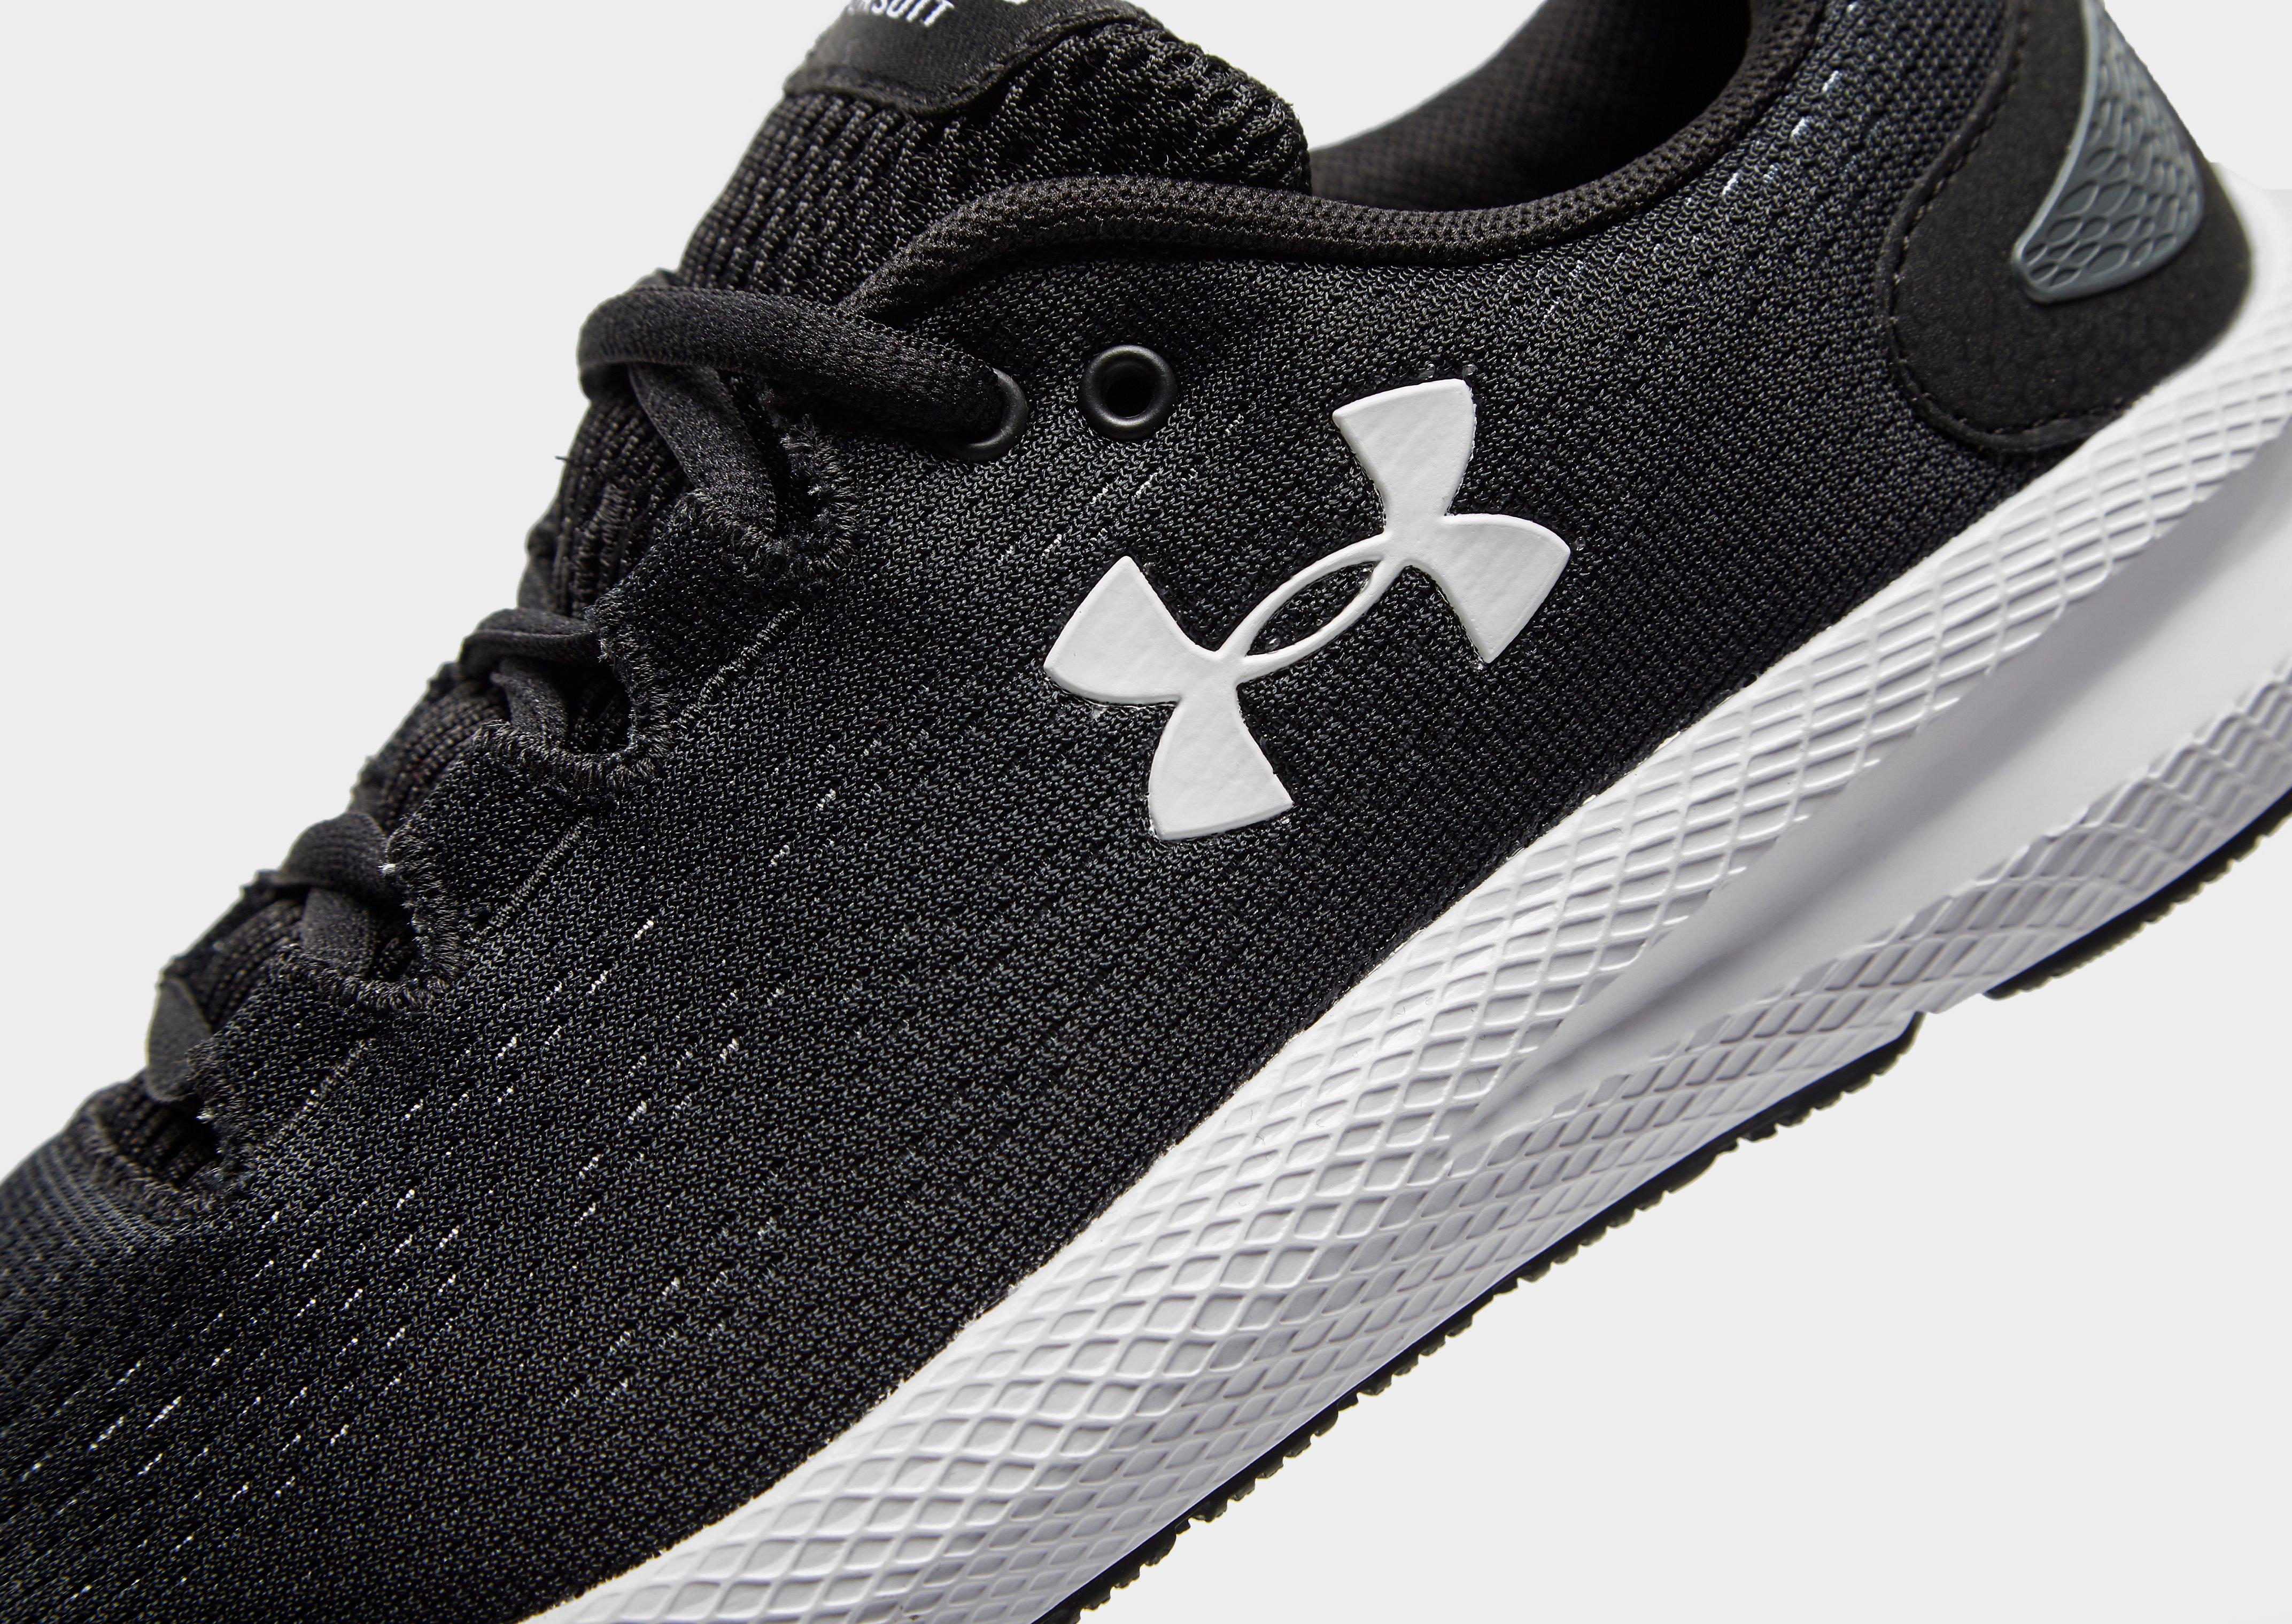 under armour charged 2